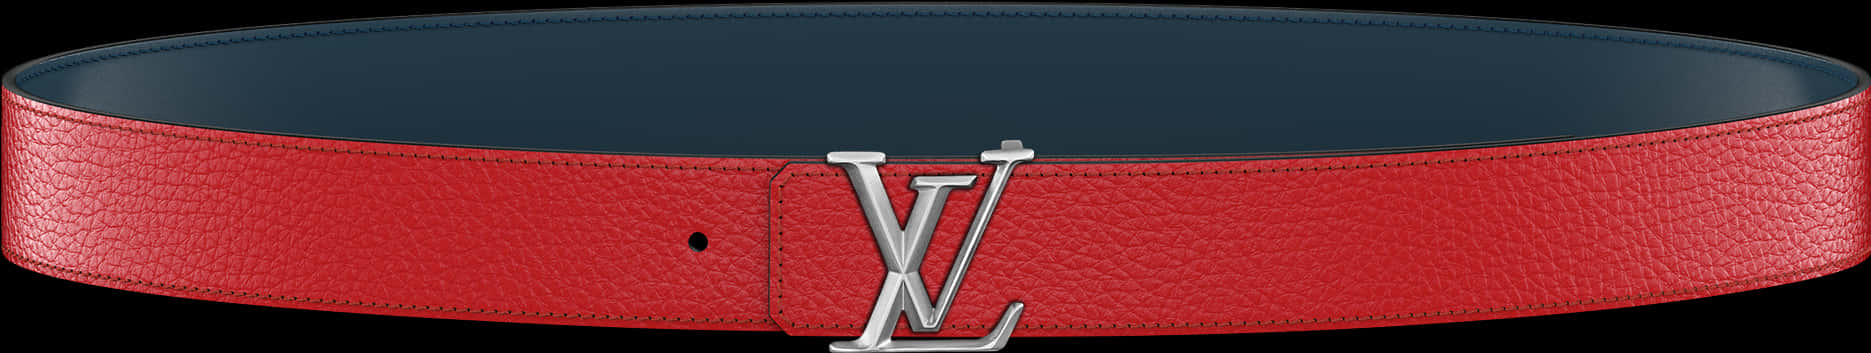 Louis Vuitton Red Leather Beltwith Silver L V Buckle